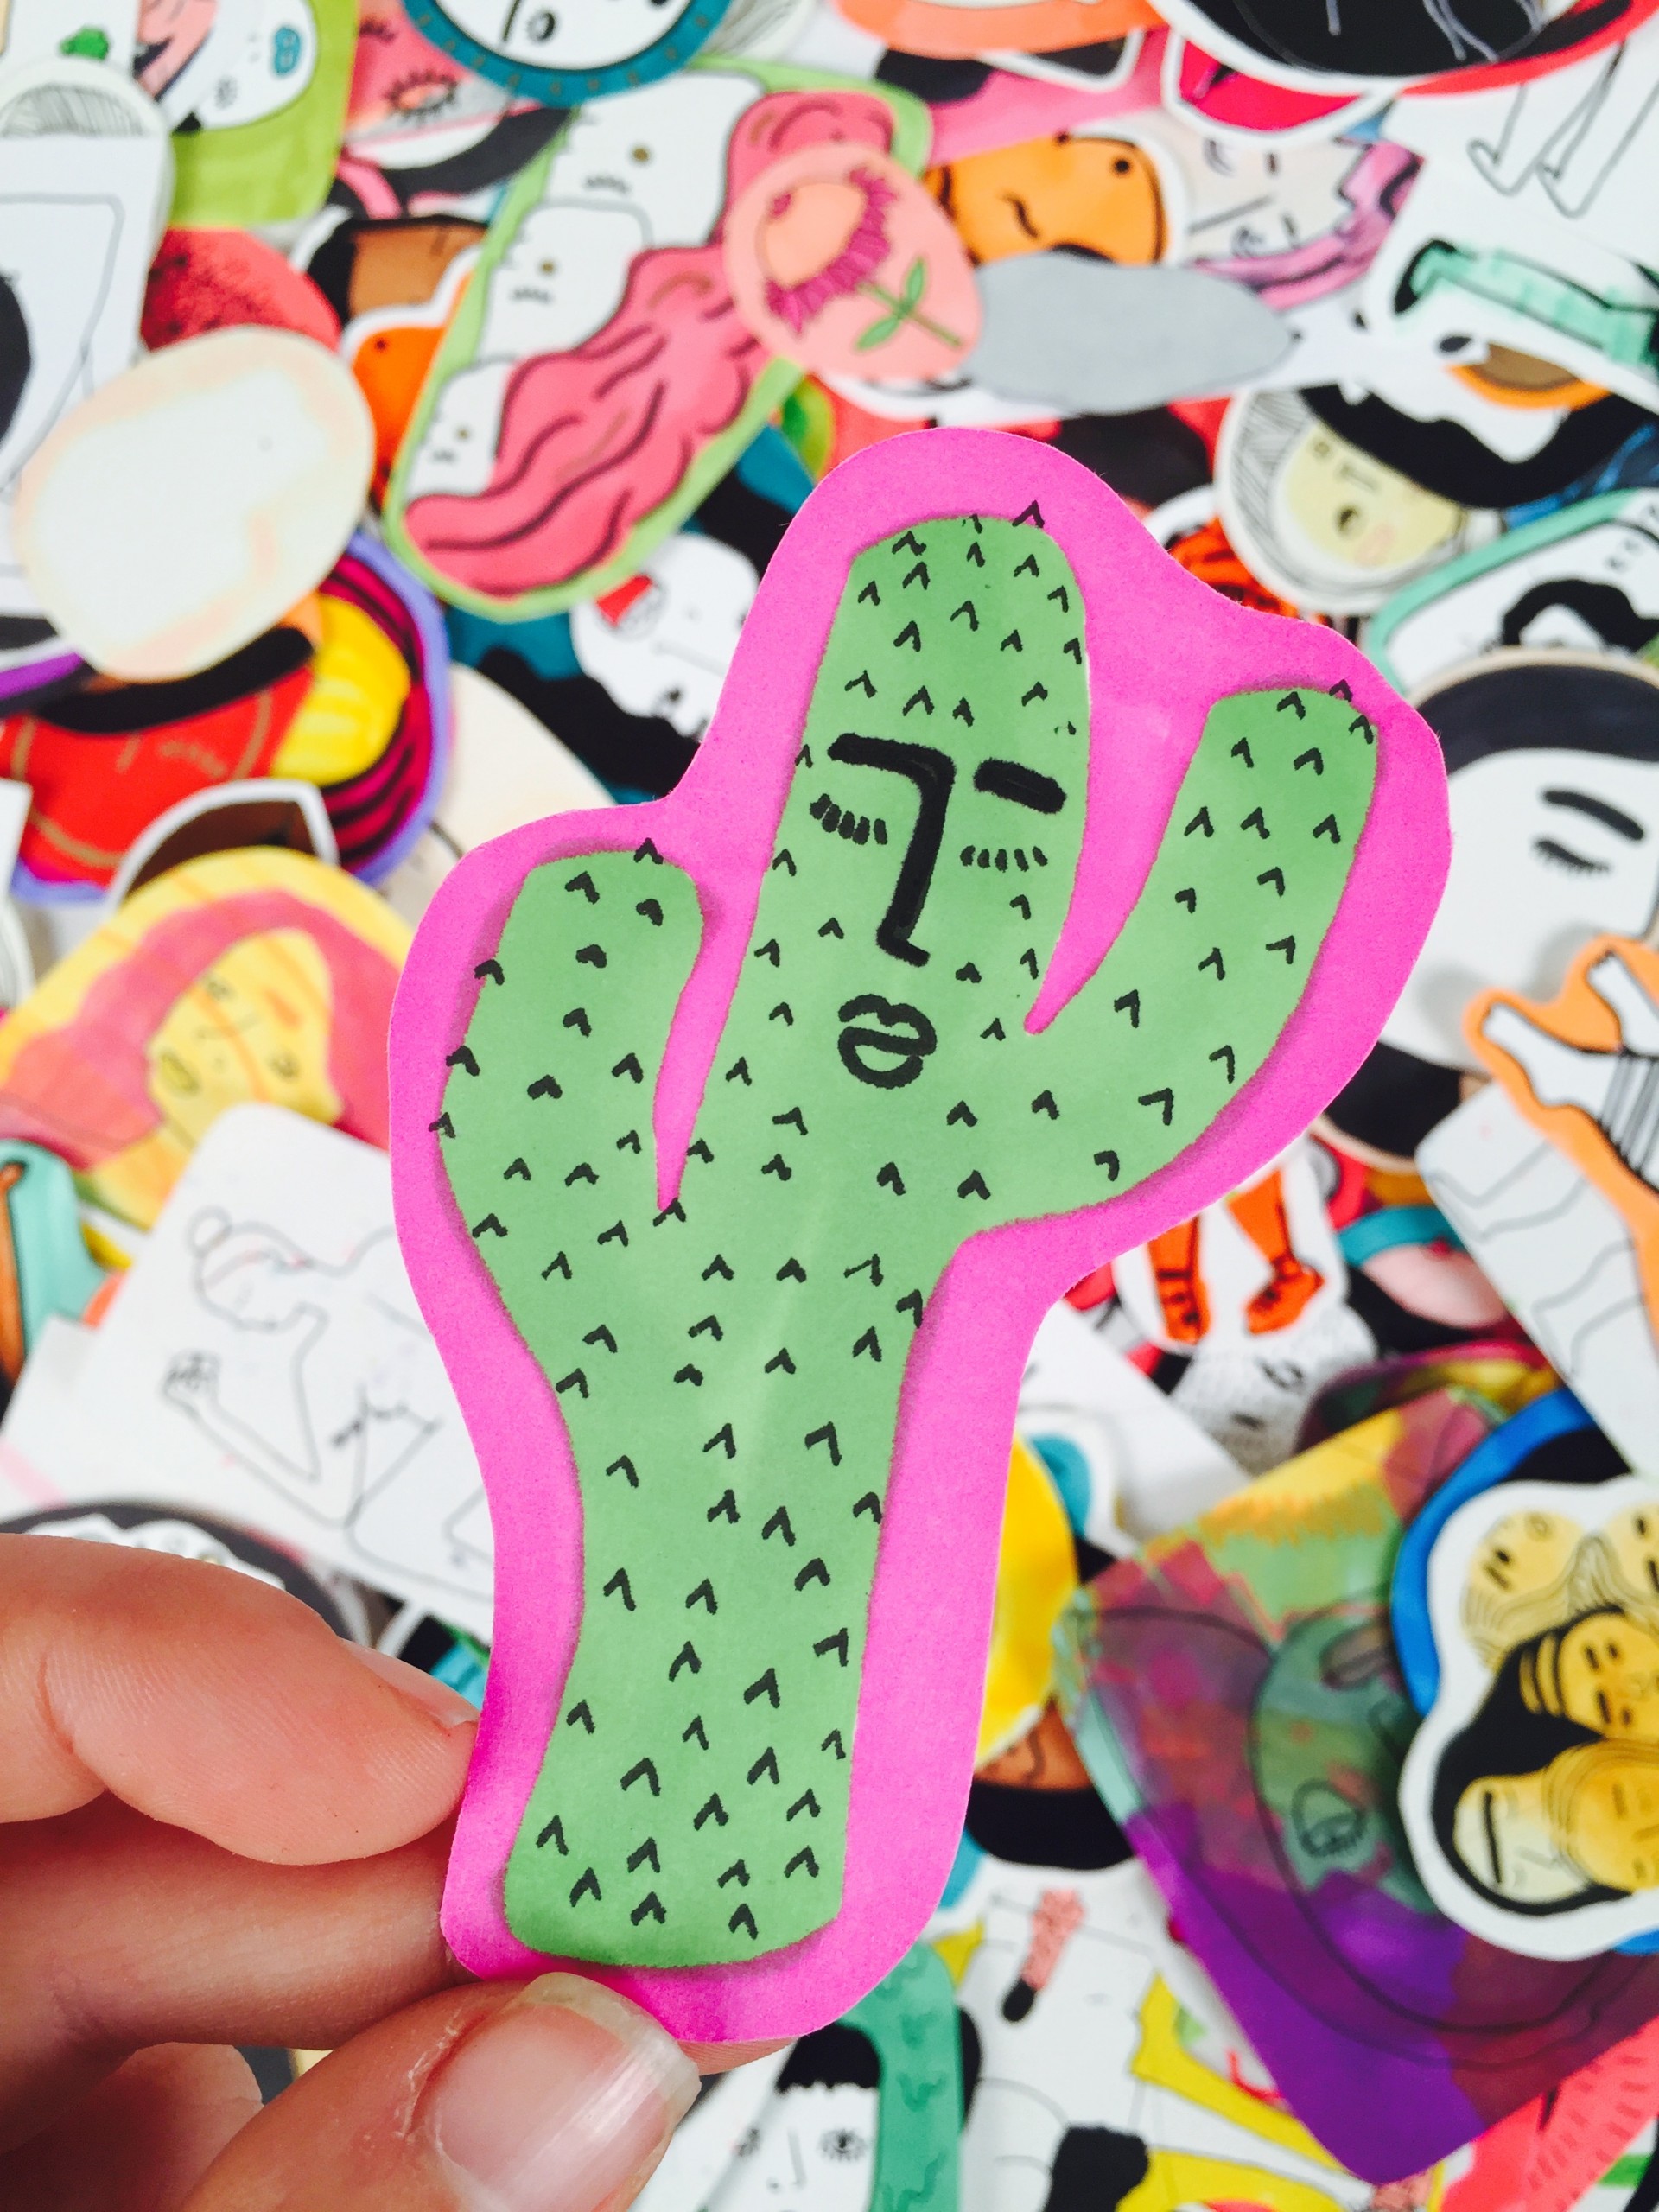 Pile of stickers. Central sticker is cactus with face on it and pink border. 